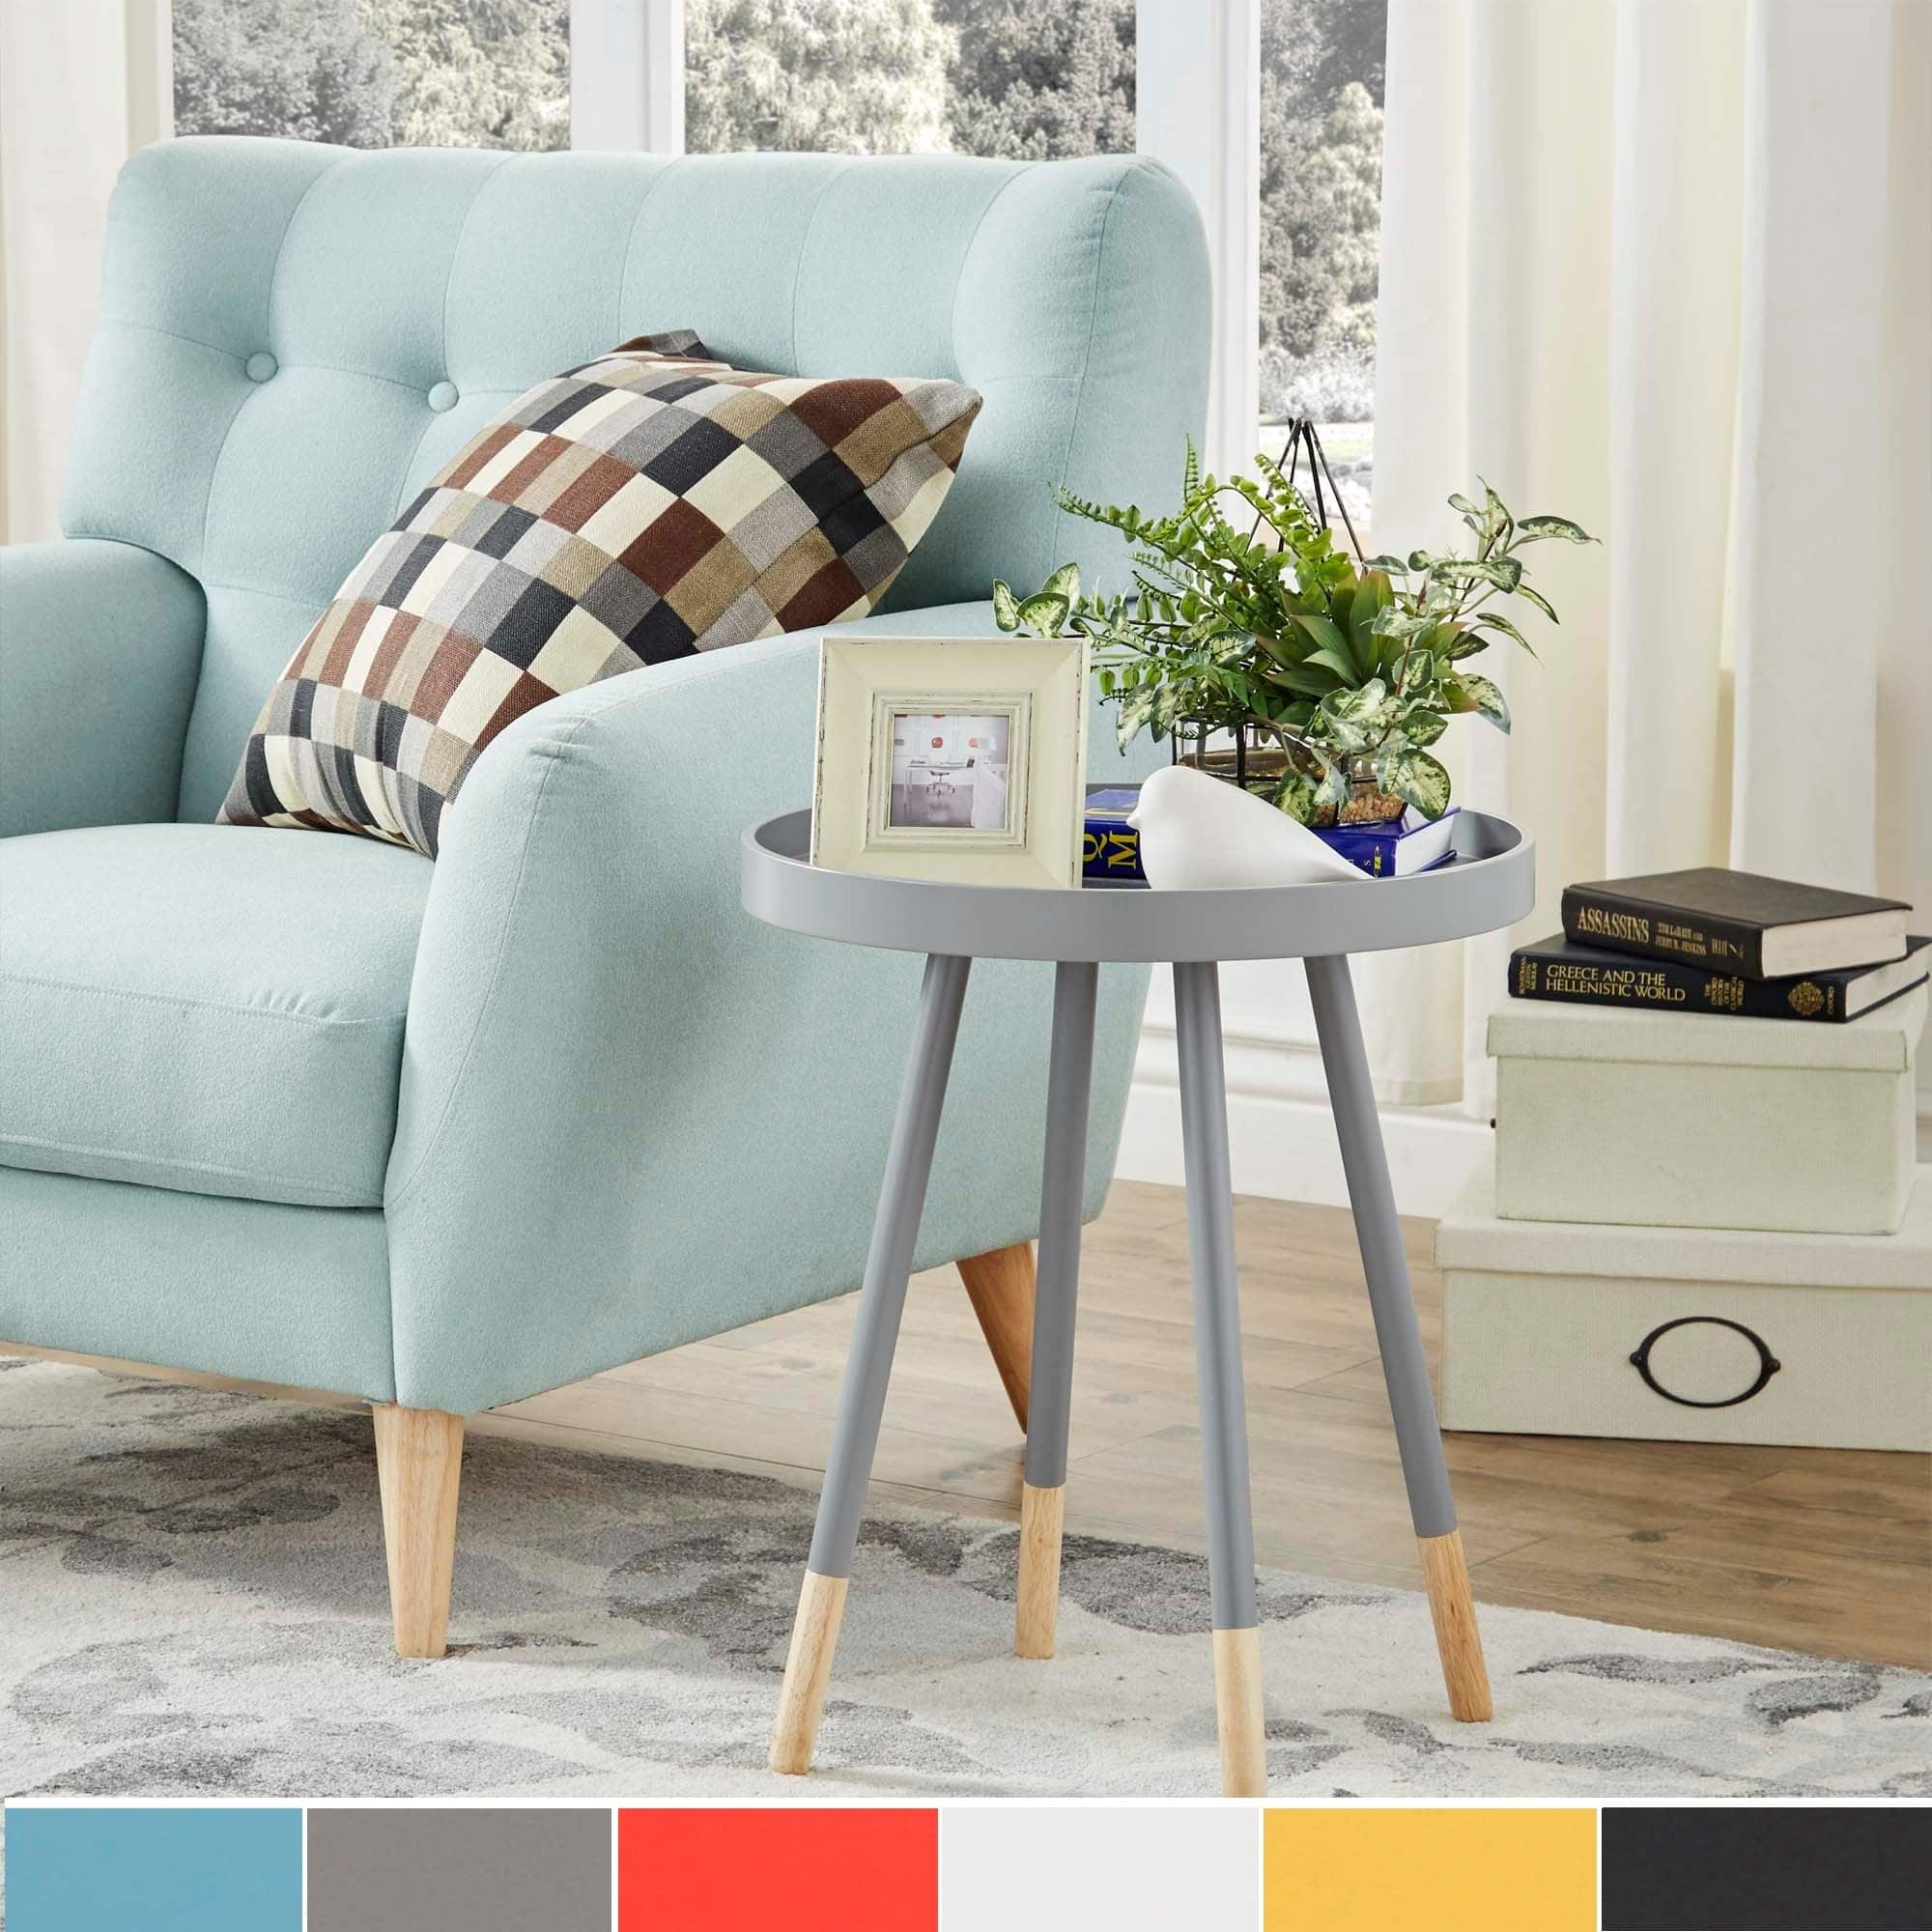 marcella paint dipped round spindle tray top side table inspire modern accent with screw legs beach floor lamp portable oak sofa lavita furniture modular sofas for small spaces